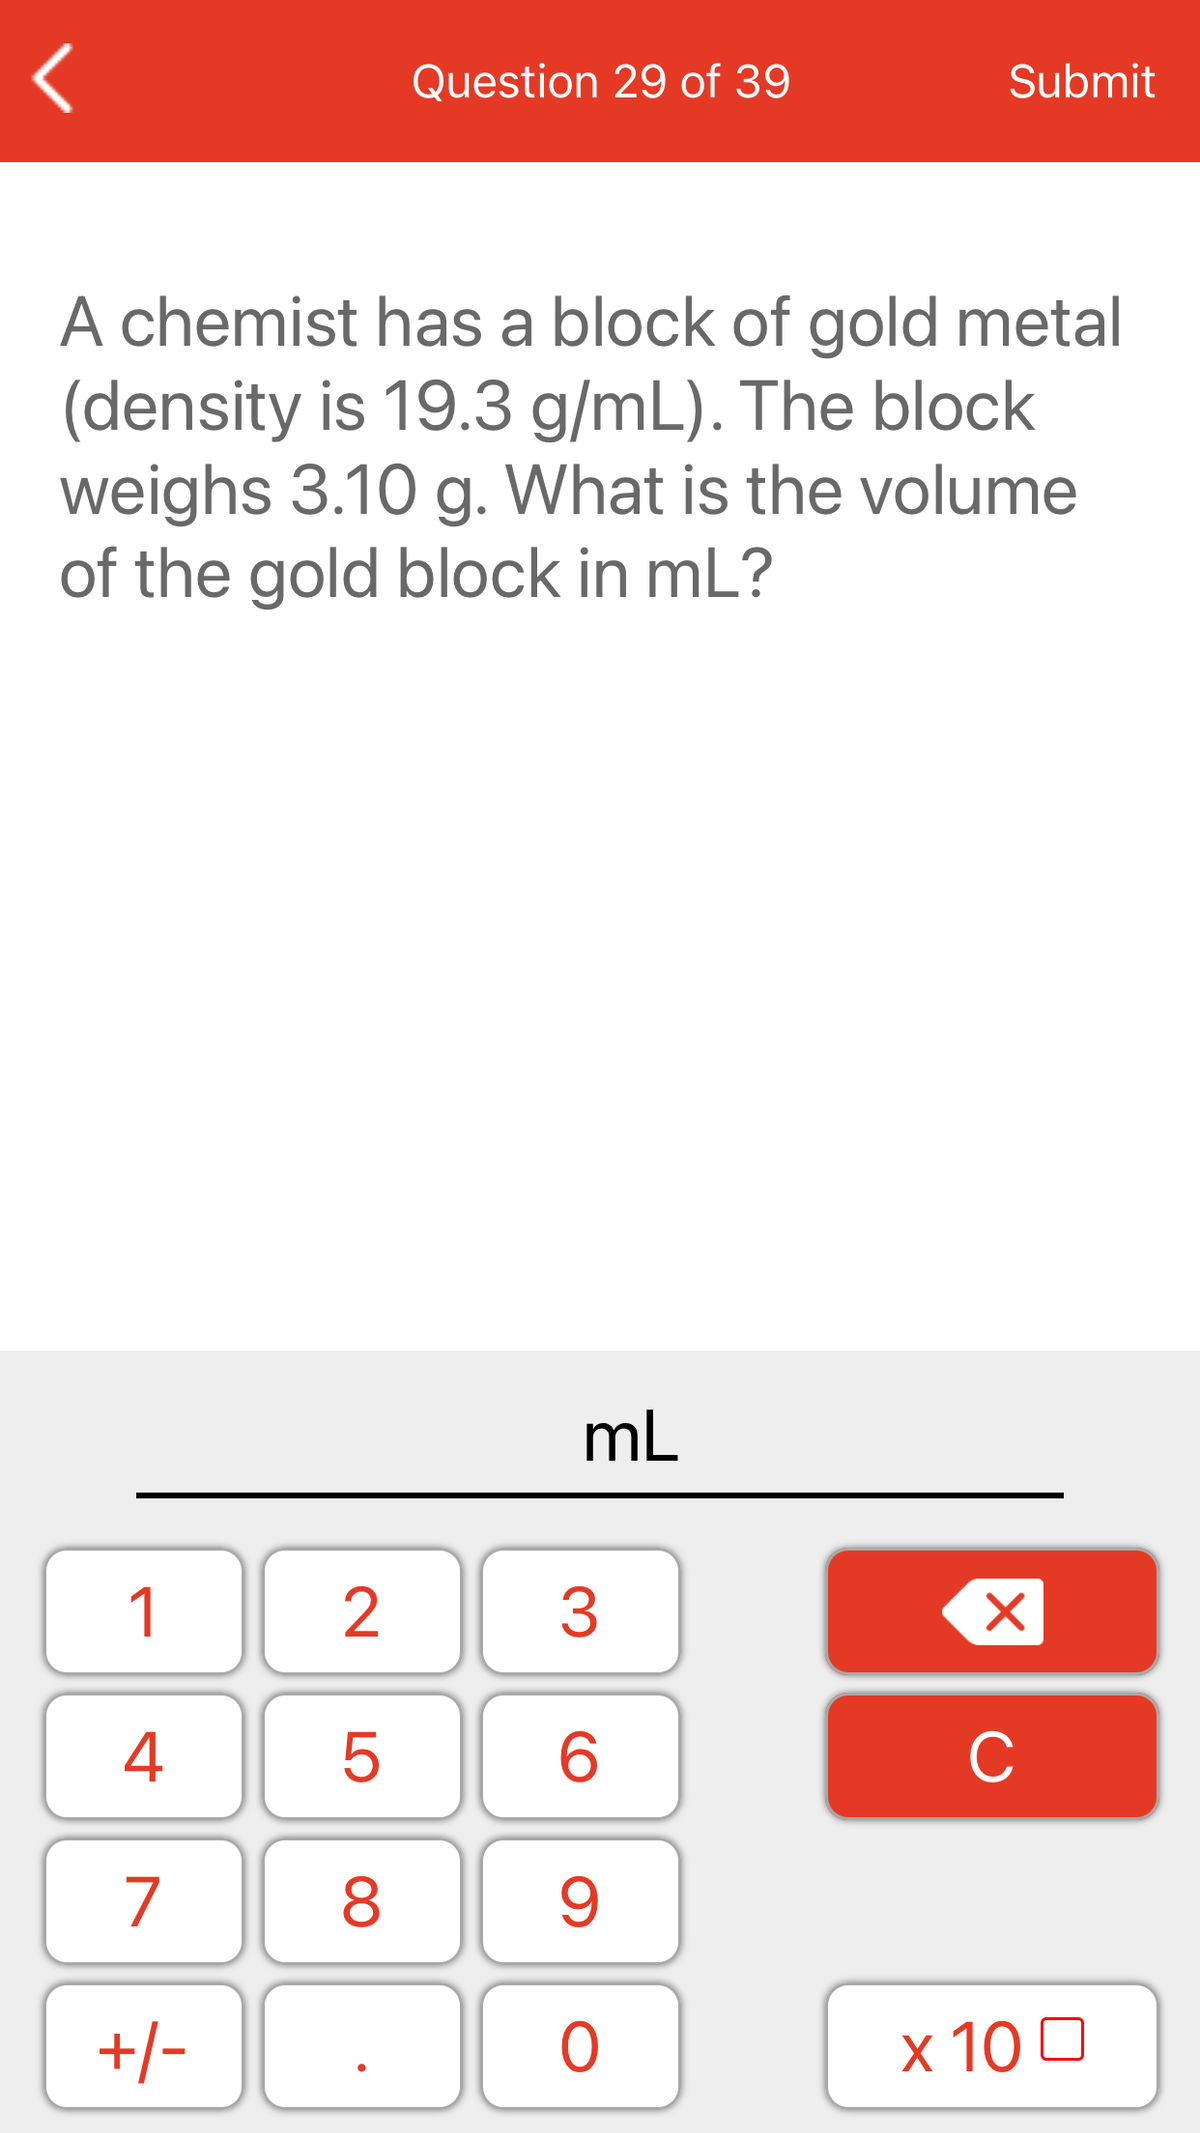 Question 29 of 39
Submit
A chemist has a block of gold metal
(density is 19.3 g/mL). The block
weighs 3.10 g. What is the volume
of the gold block in mL?
mL
1
2
3
4
C
7
+/-
x 10 0
LO
00
